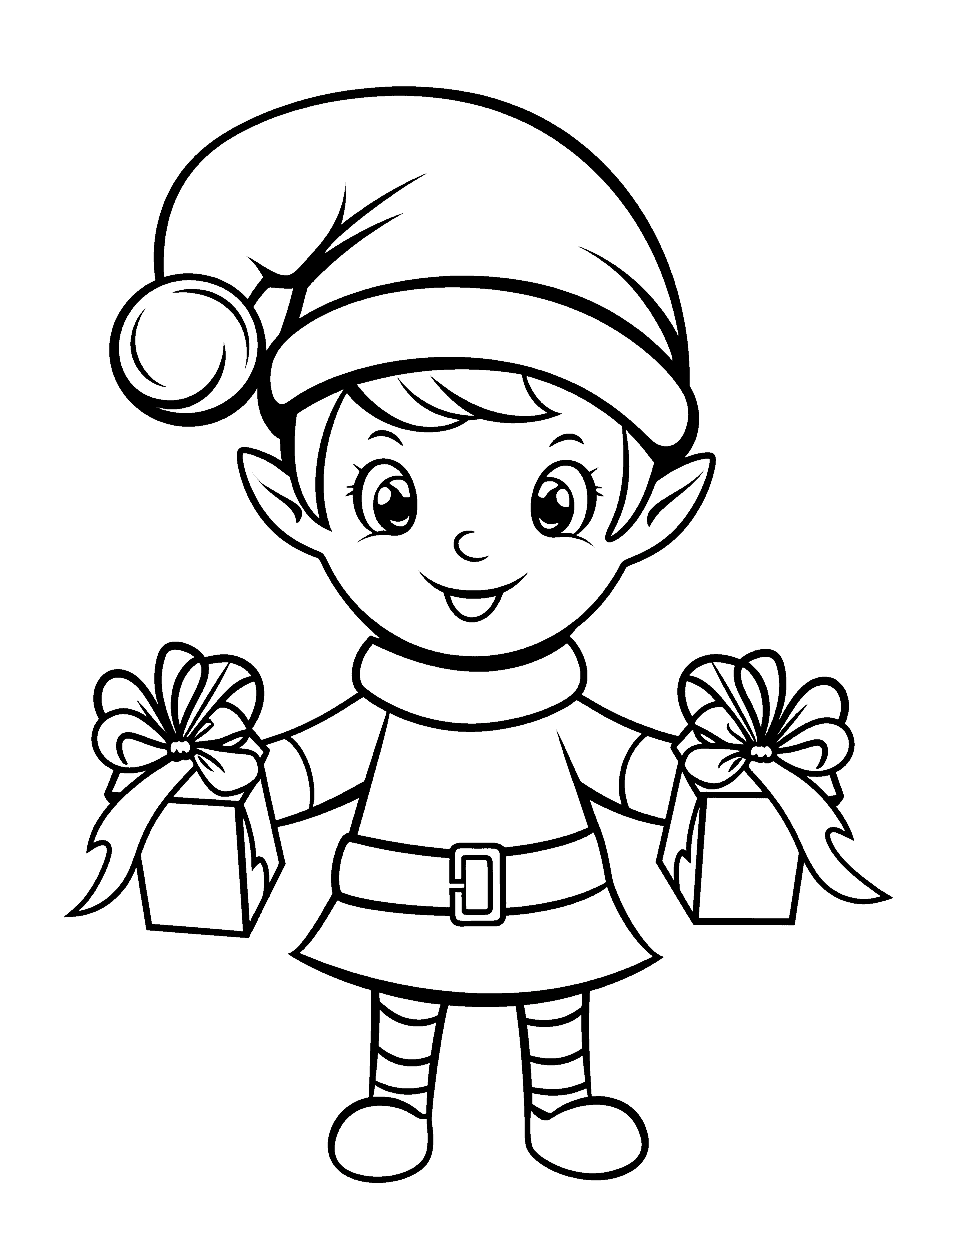 Elf on the Shelf Christmas Coloring Page - The popular Elf on the Shelf character.